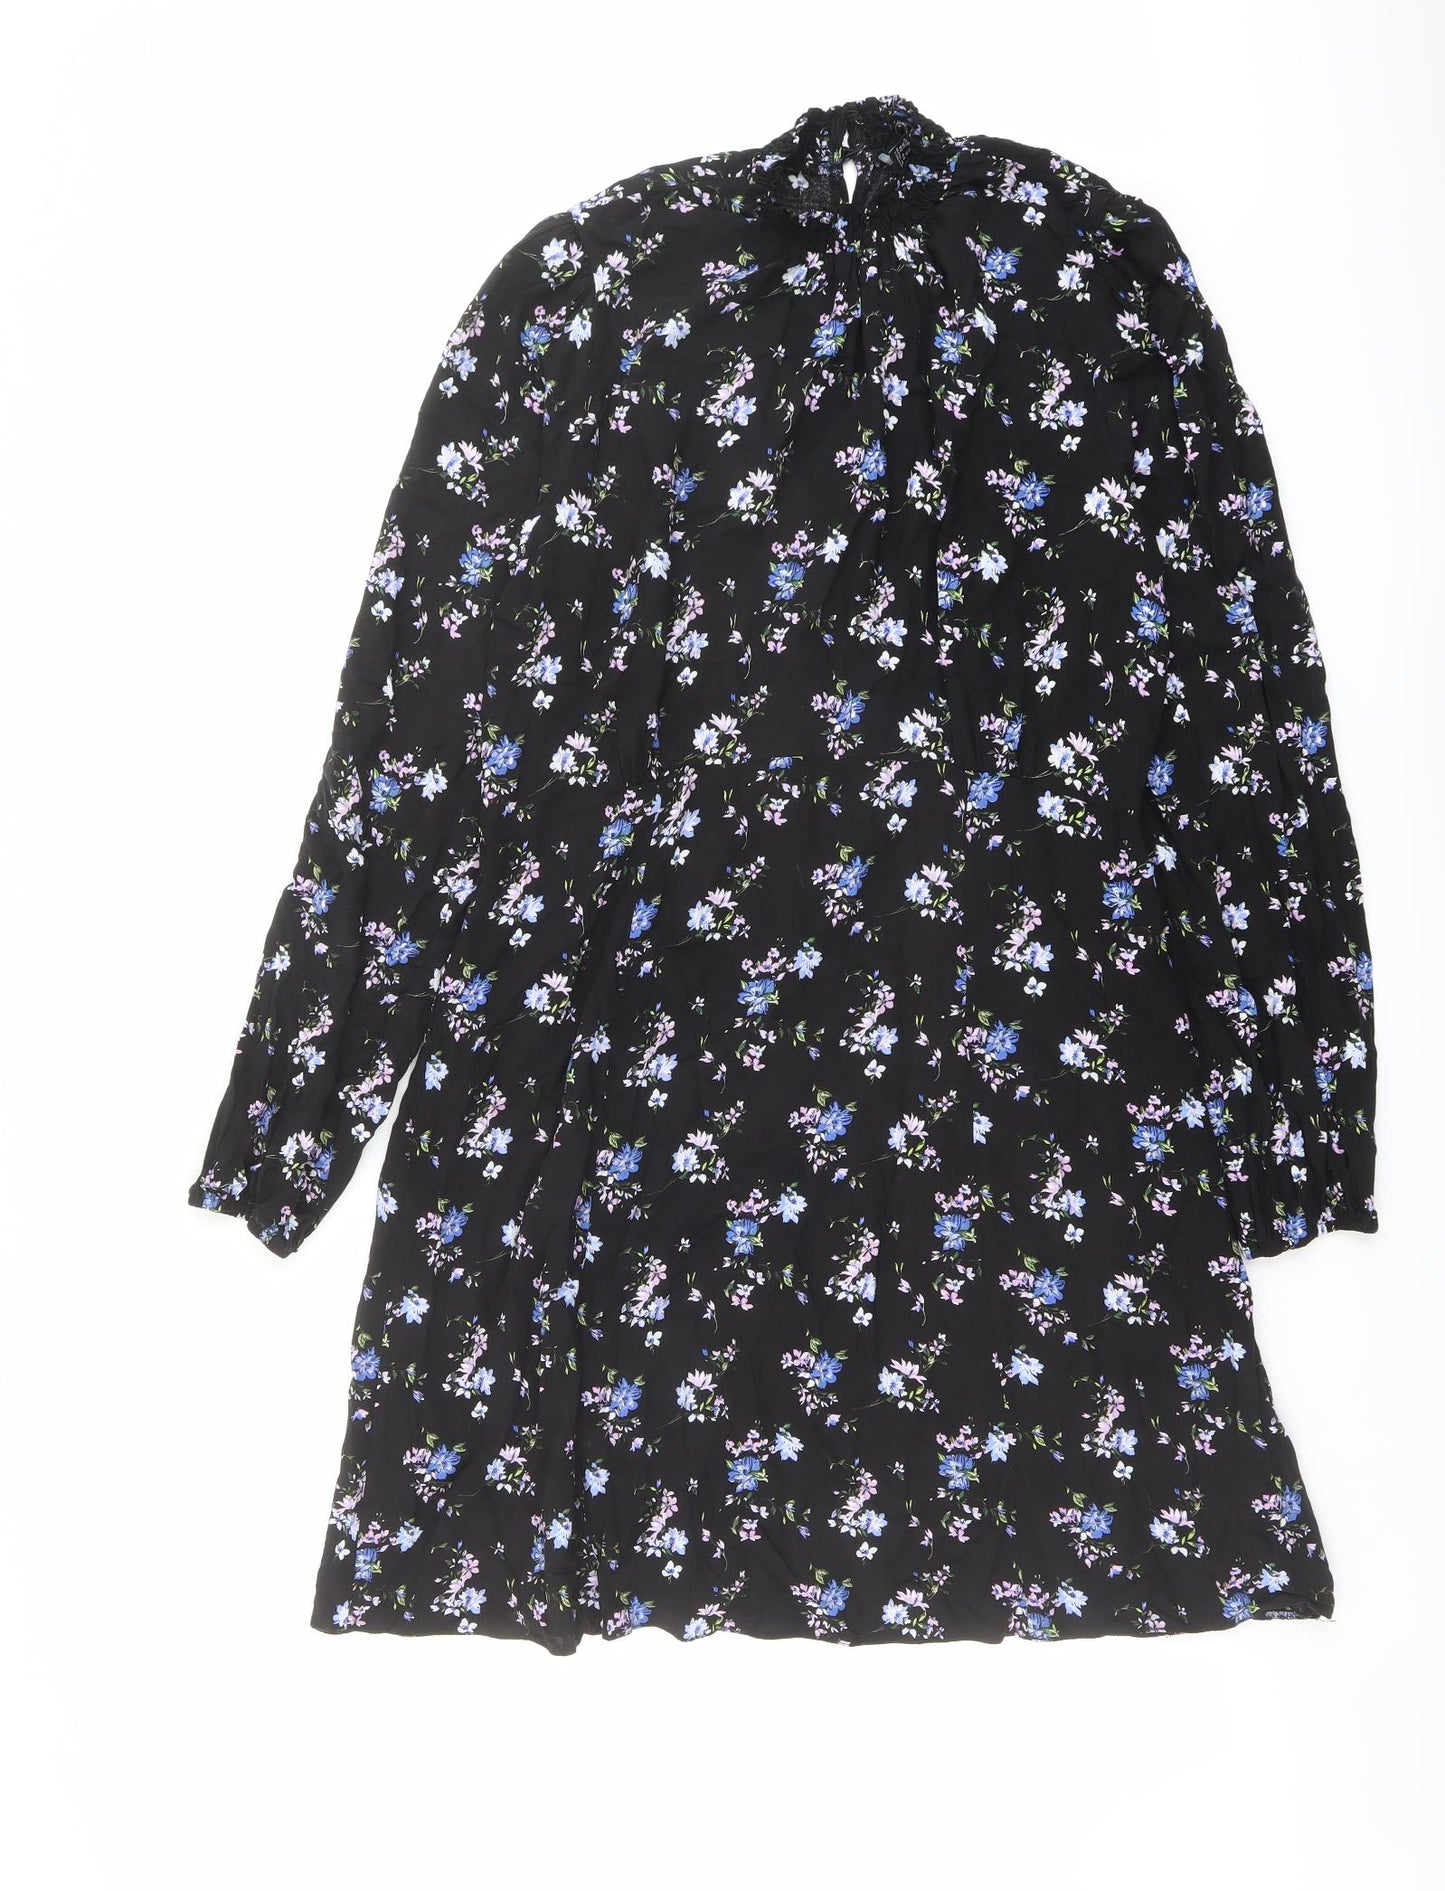 Friends Like These Womens Black Floral Viscose Shift Size 16 Mock Neck Button